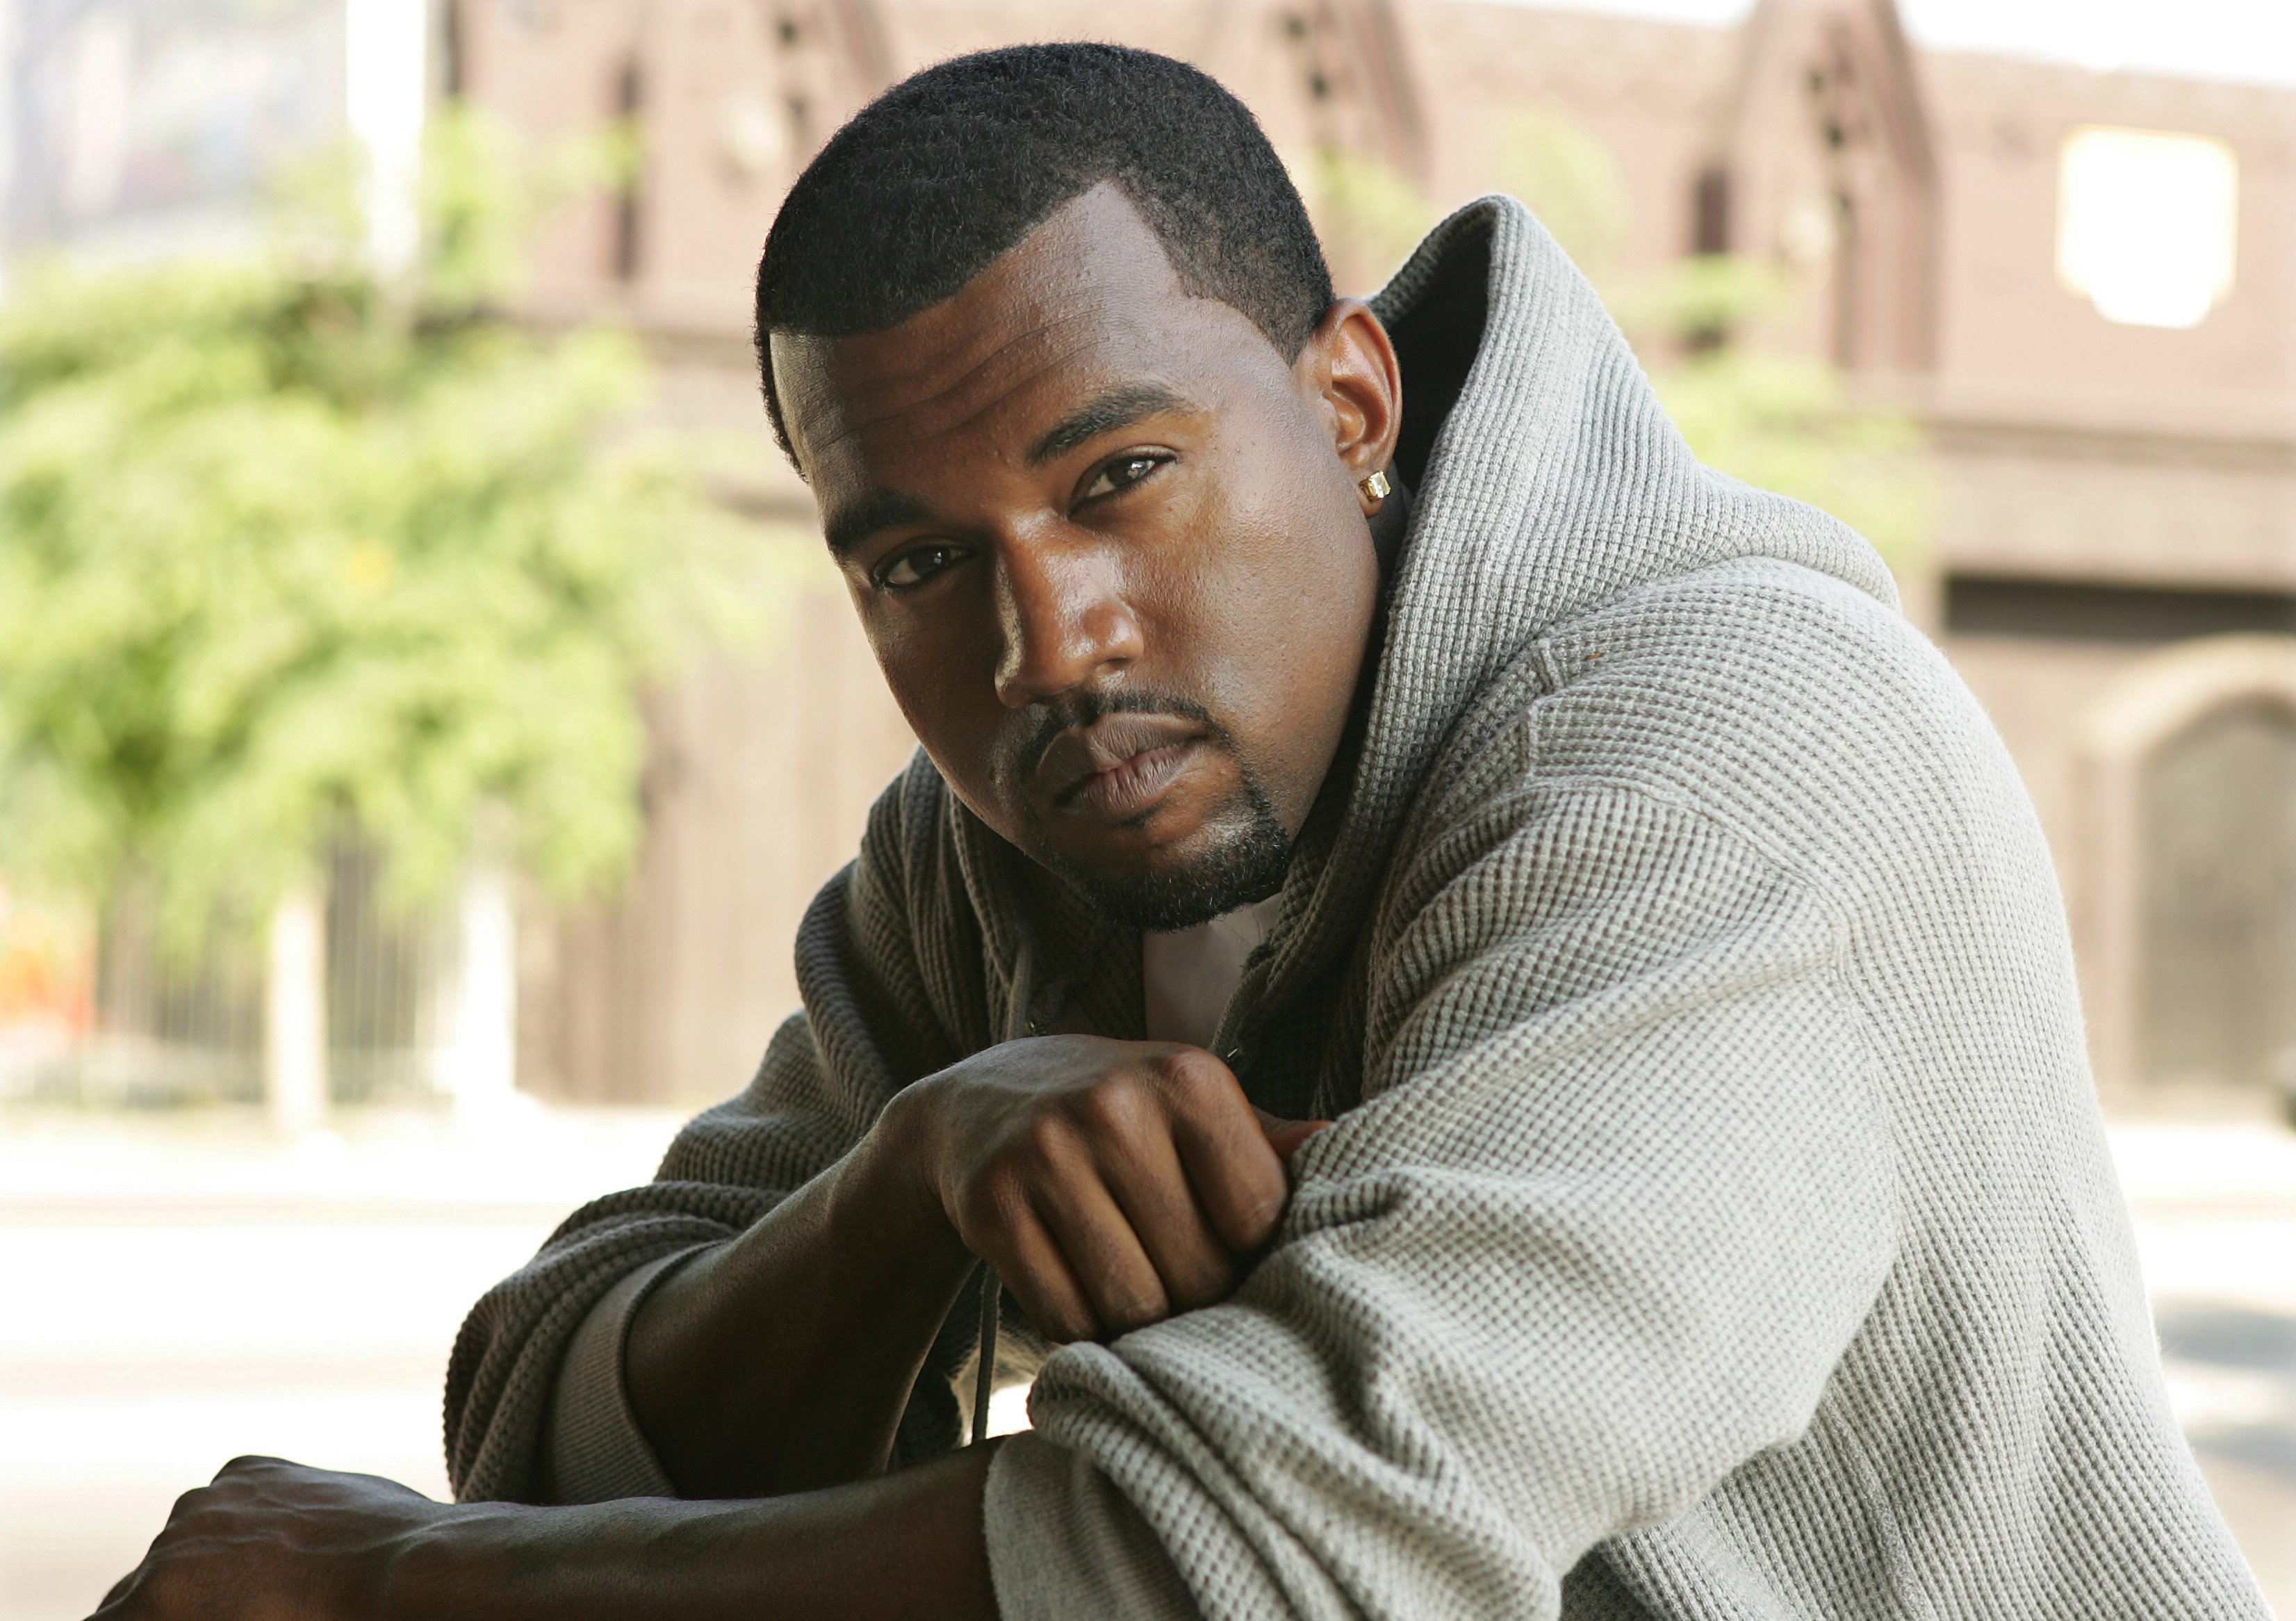 Kanye West photographed July 29, 2005 in Los Angeles, California | Photo: Getty Images